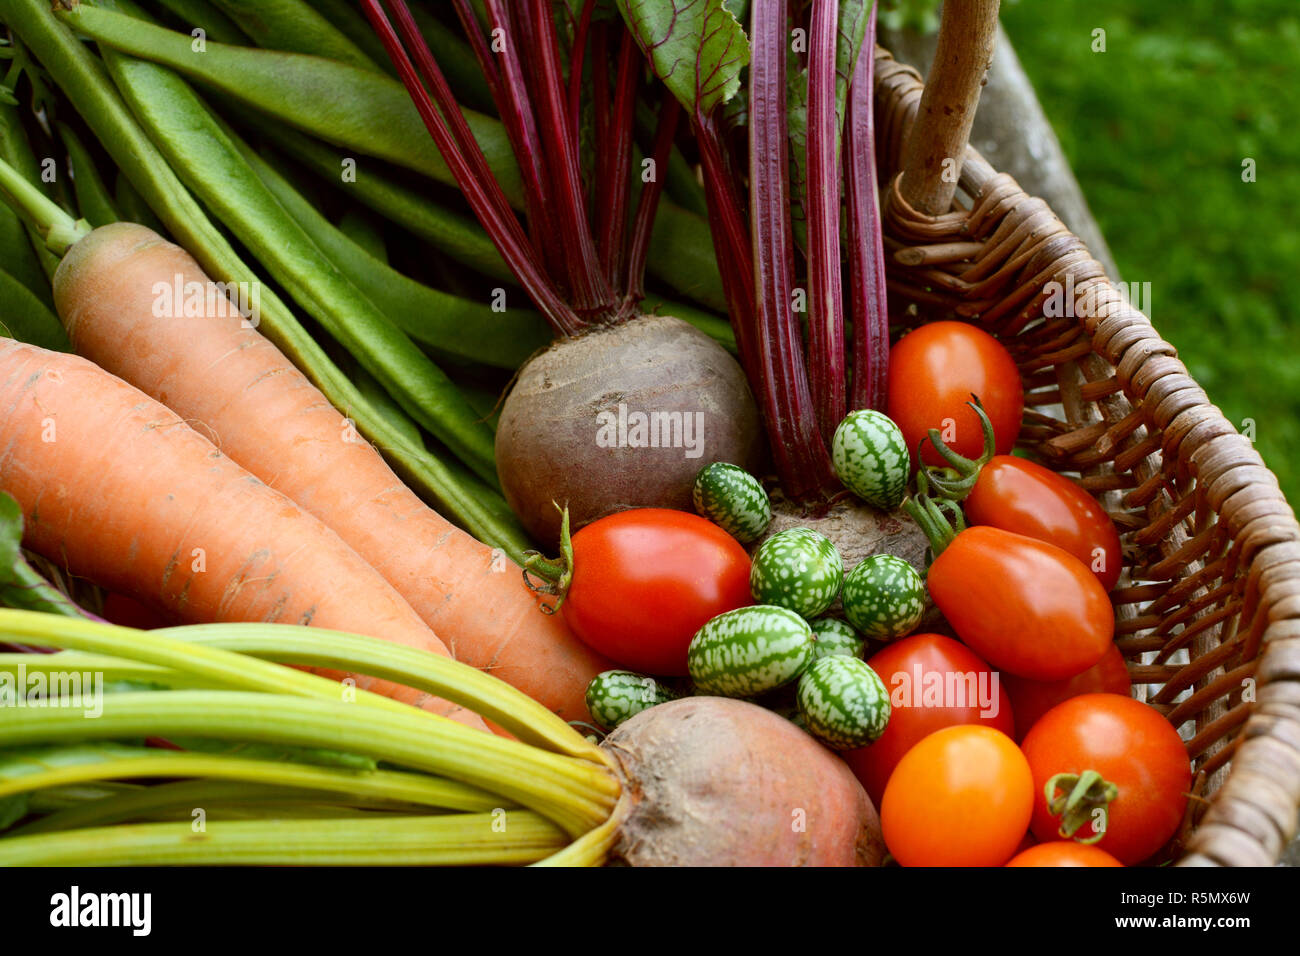 Freshly harvested vegetables from the allotment in a basket Stock Photo